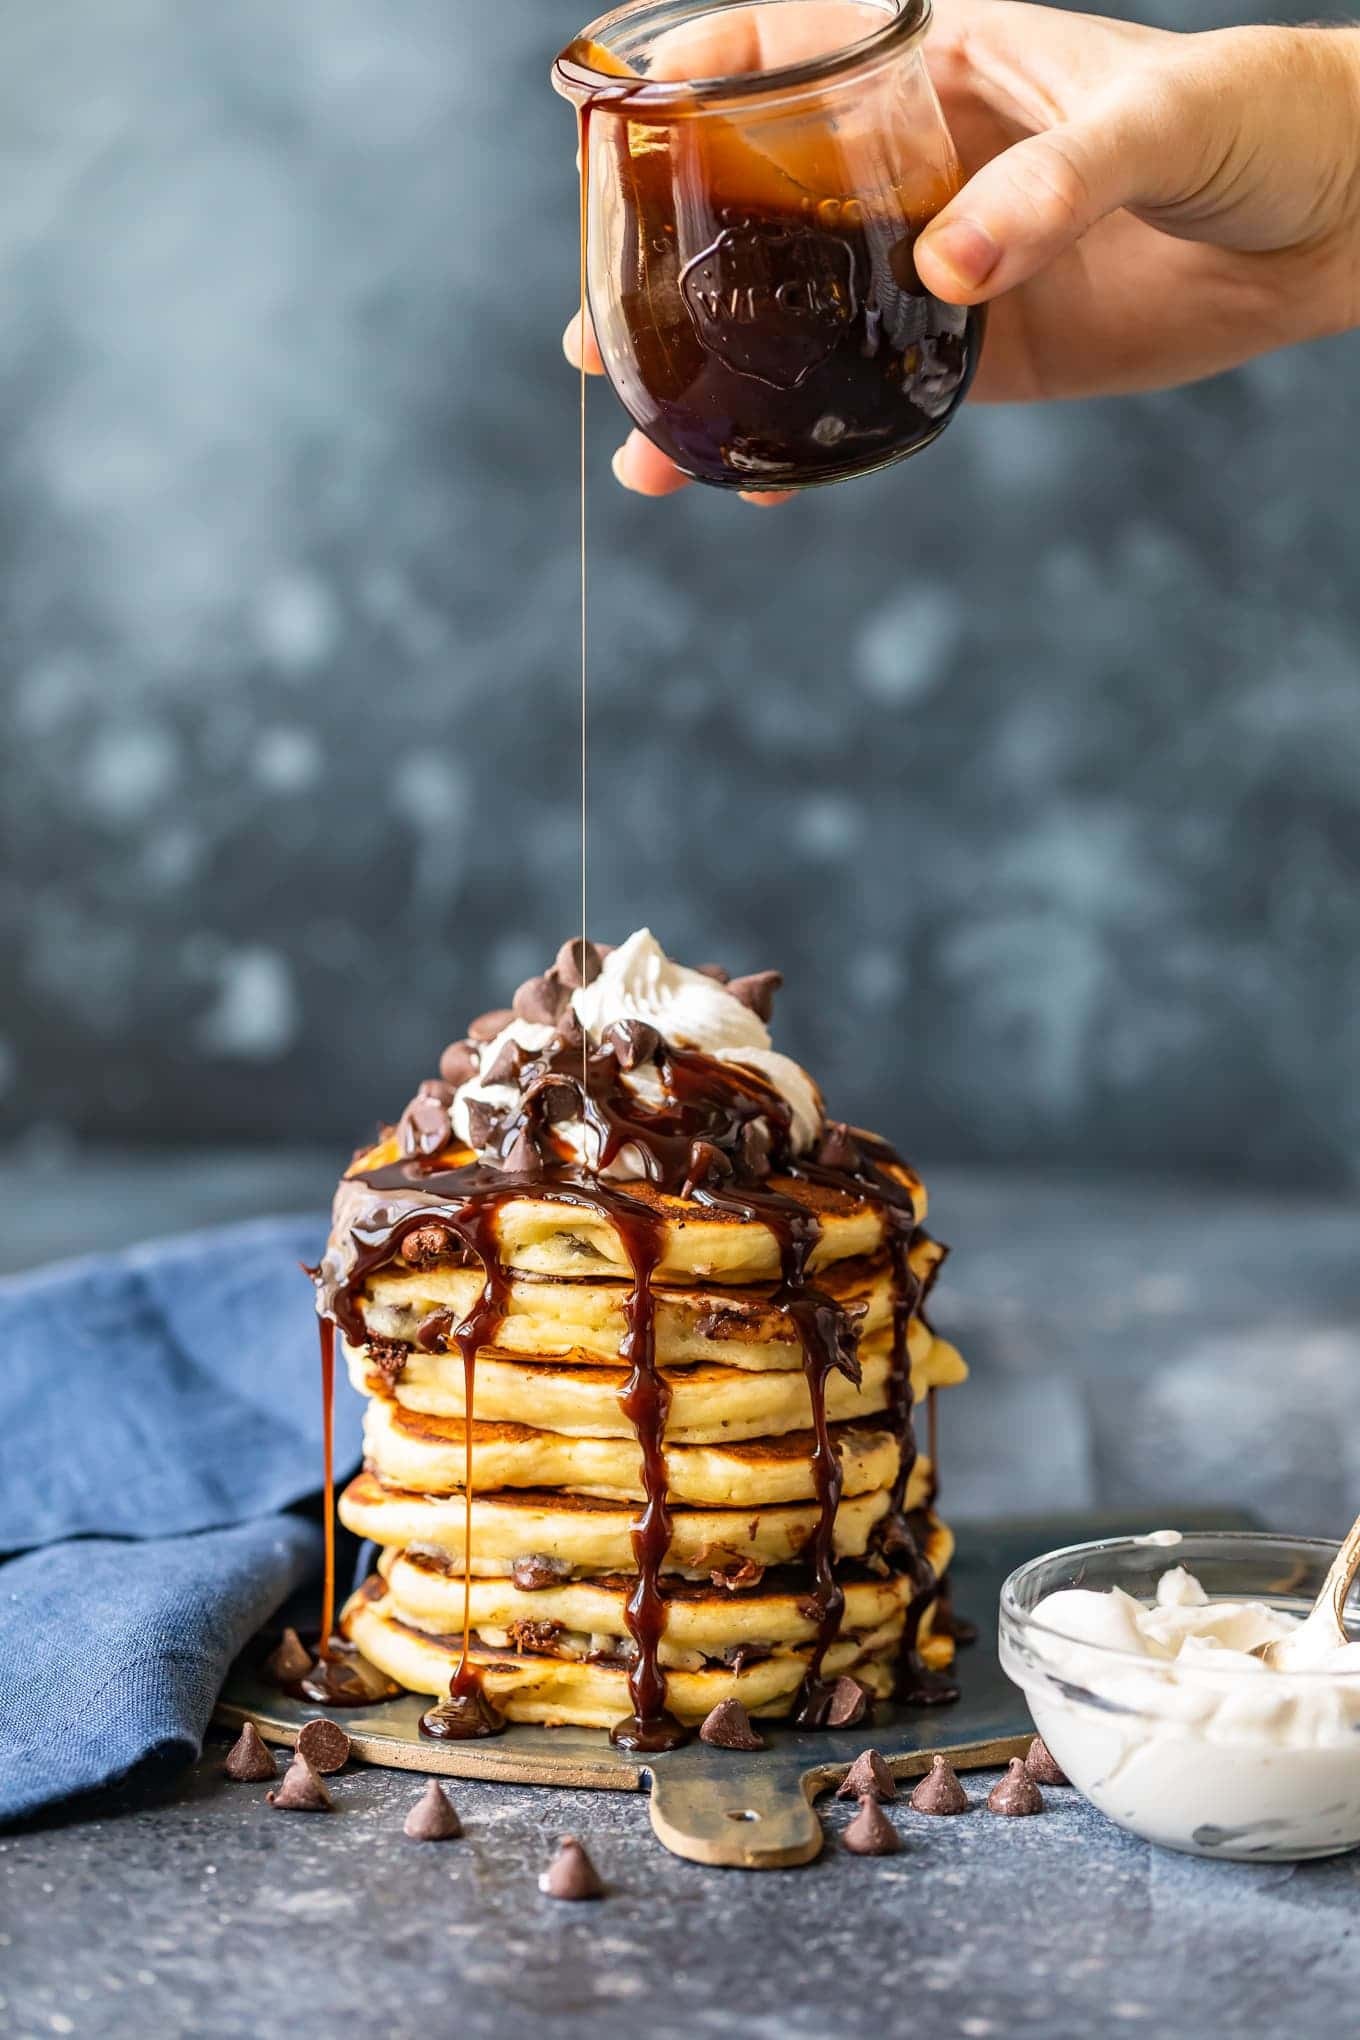 Pancakes With Chocolate Syrup
 Chocolate Chip Pancakes Recipe with Chocolate Syrup